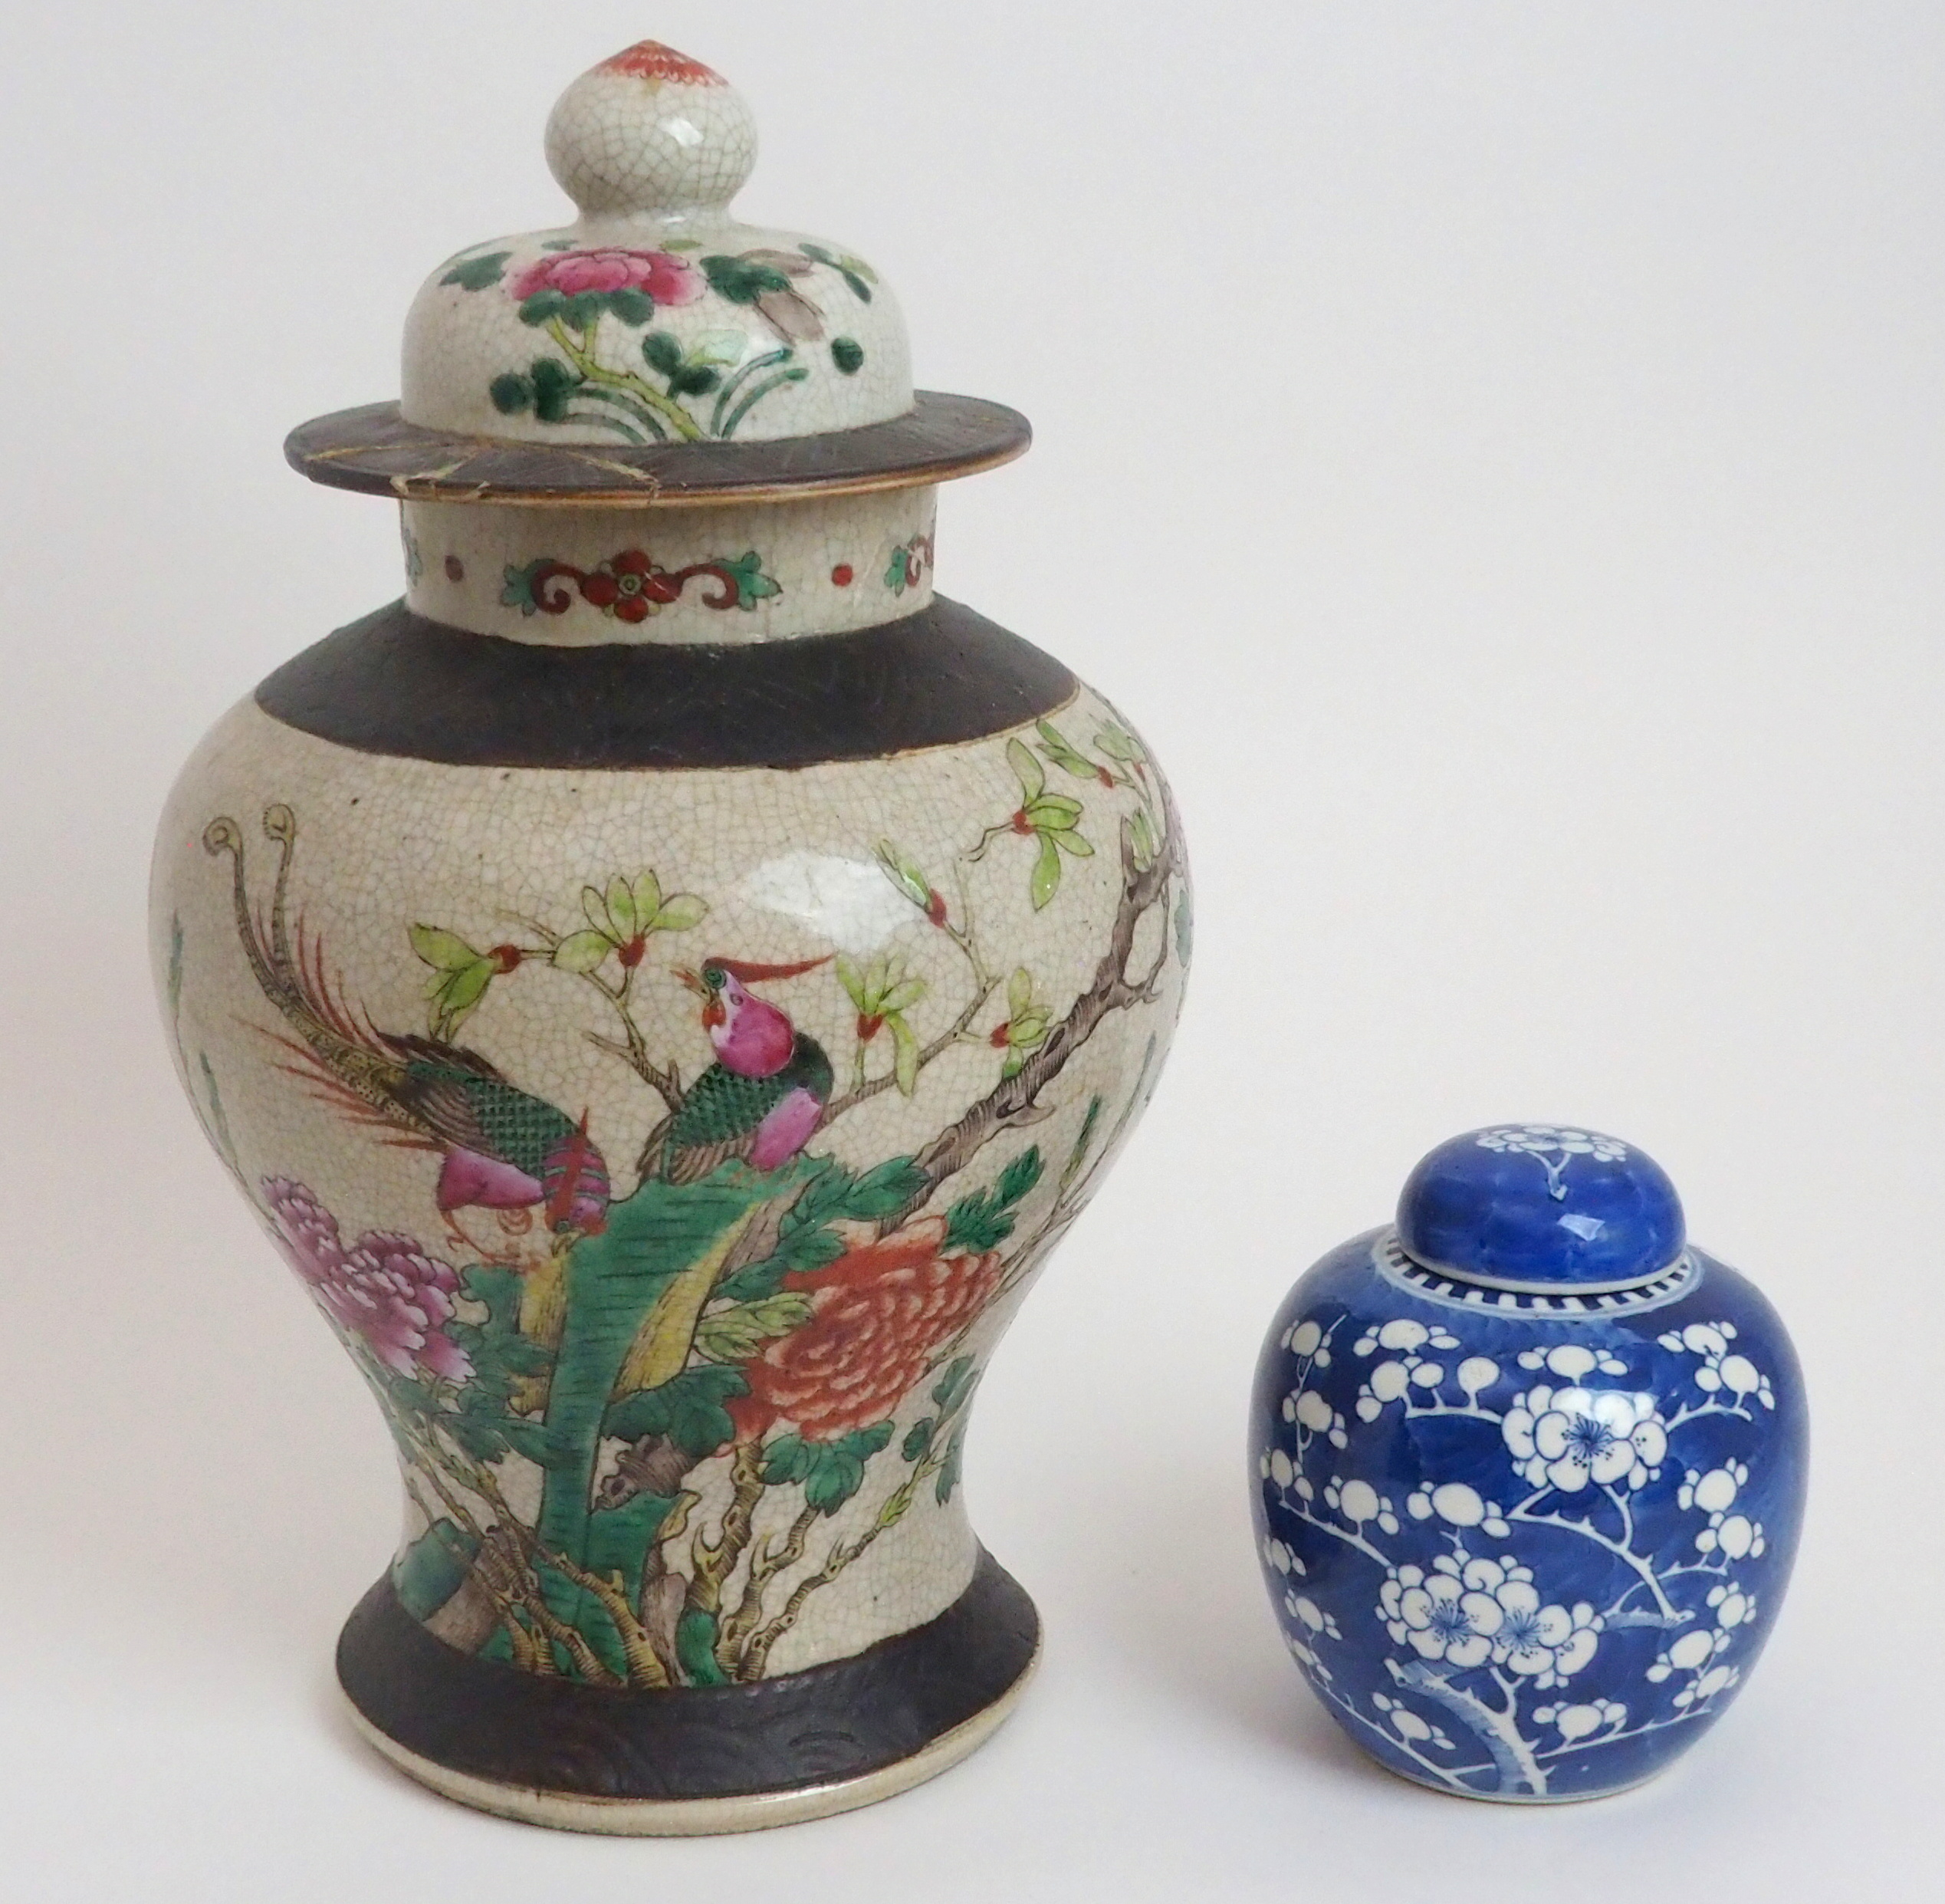 A CHINESE FAMILLE ROSE CRACKLEWARE JAR AND COVER painted with birds amongst foliage issuing from